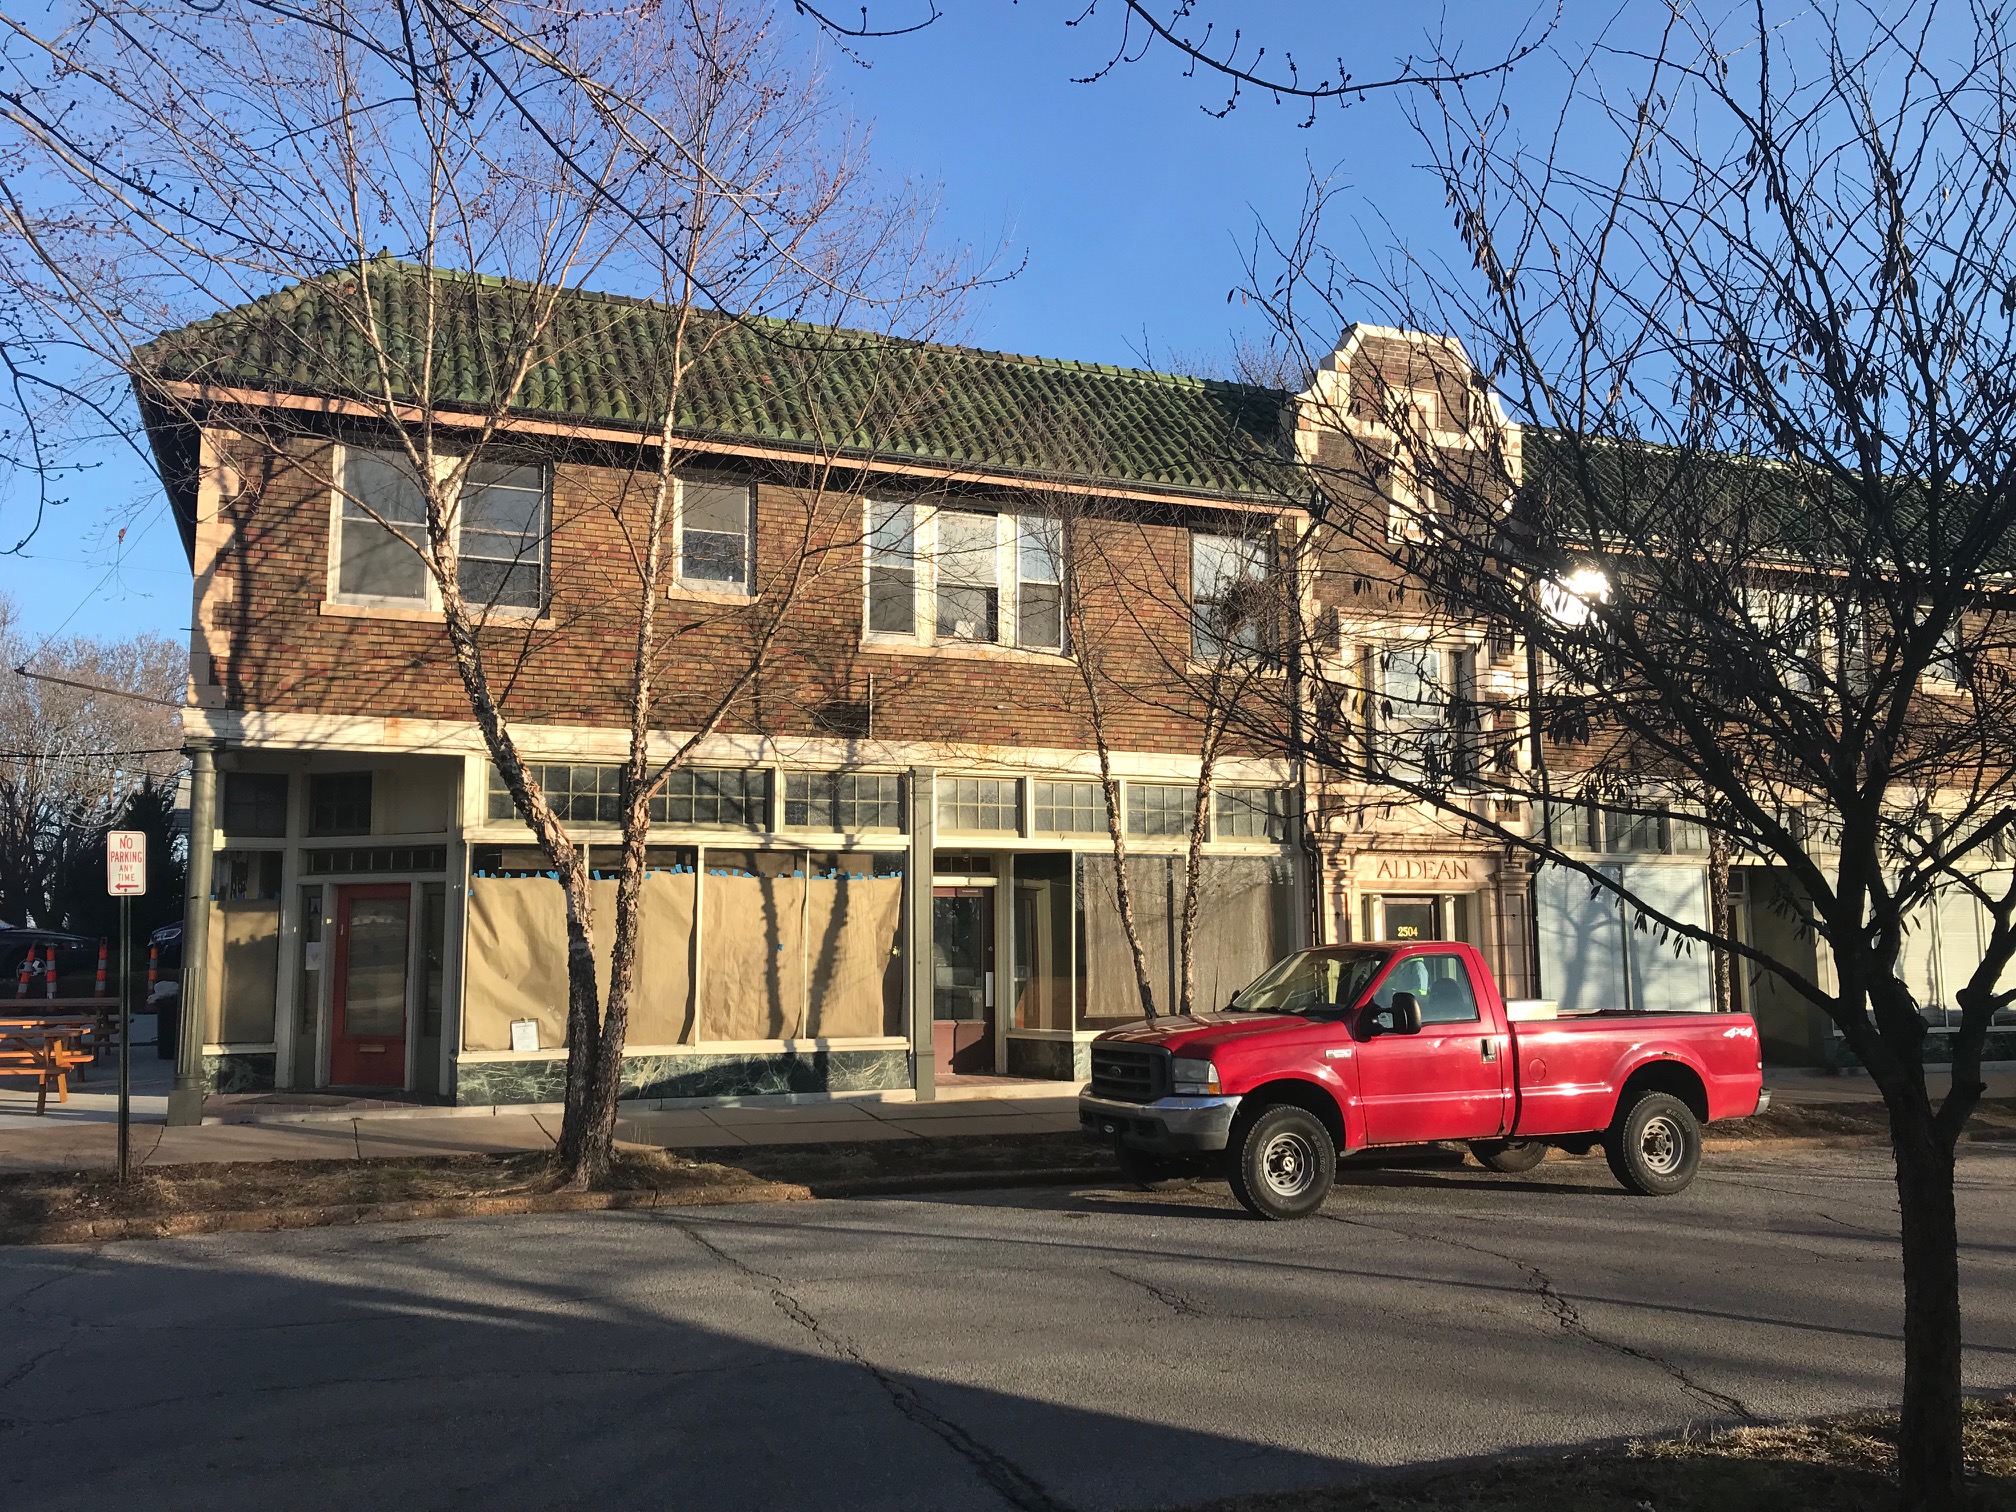 Coffee shop, bakery, looks for March opening, as building is rehabbed